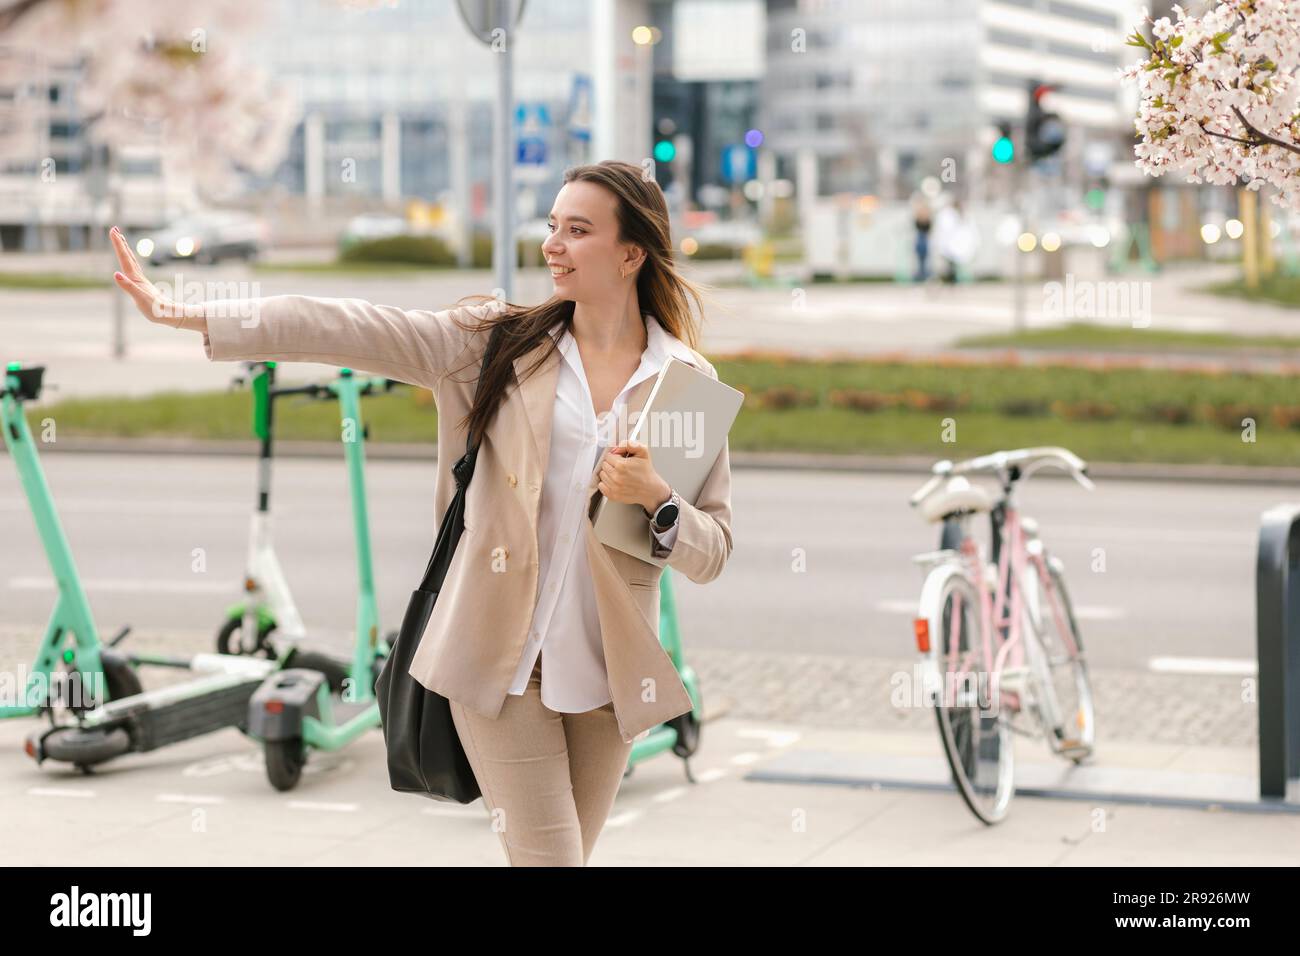 Smiling young businesswoman stop gesturing and crossing road Stock Photo